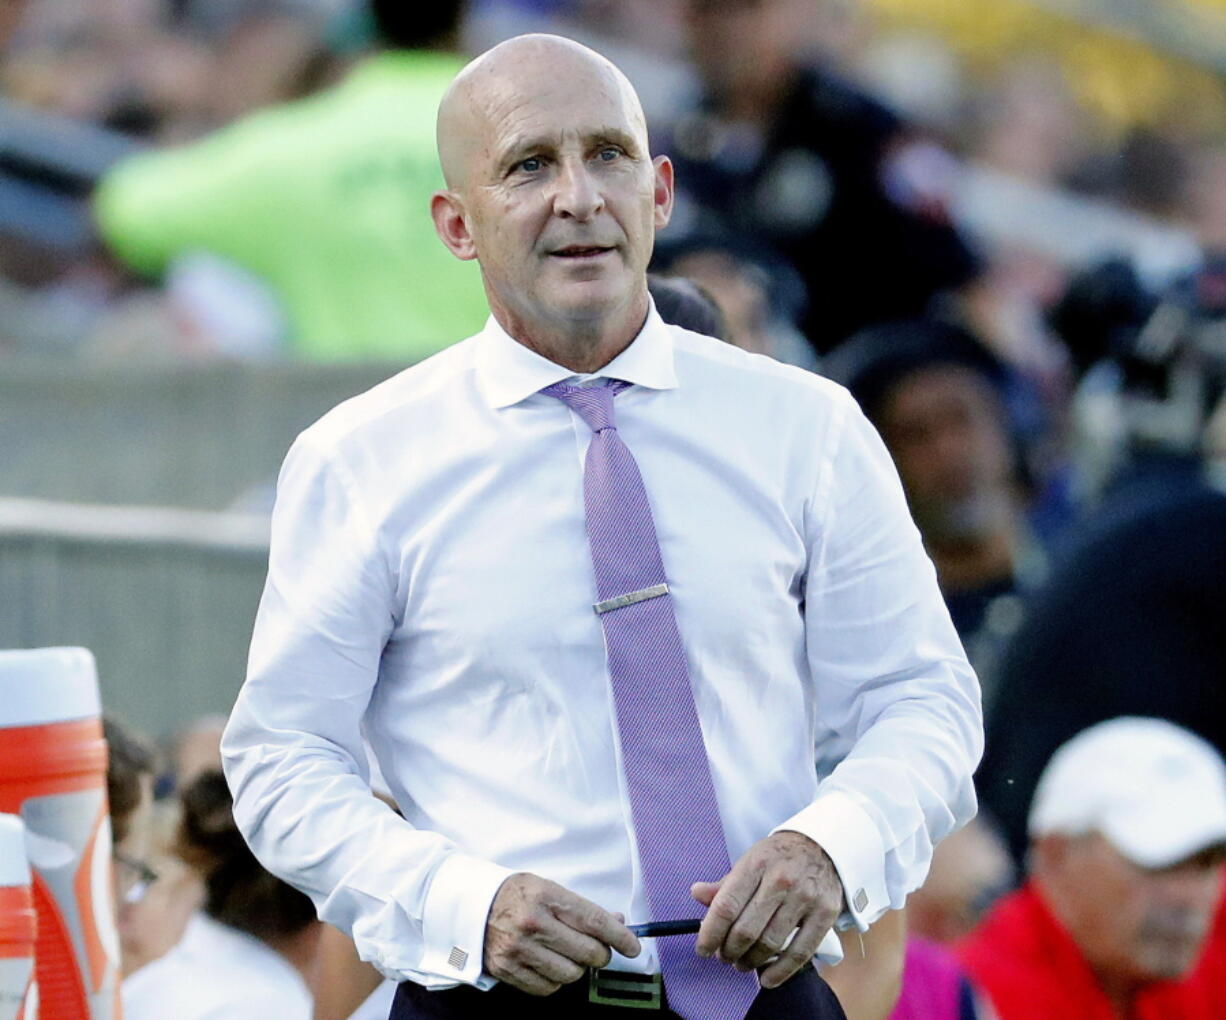 North Carolina Courage head coach Paul Riley was fired, effective immediately, after allegations of sexual harassment and misconduct. The allegations were first reported by The Athletic in a story Thursday, Sept. 30, 2021, that detailed misconduct stretching back more than a decade, including his time as head coach of the Portland Thorns.